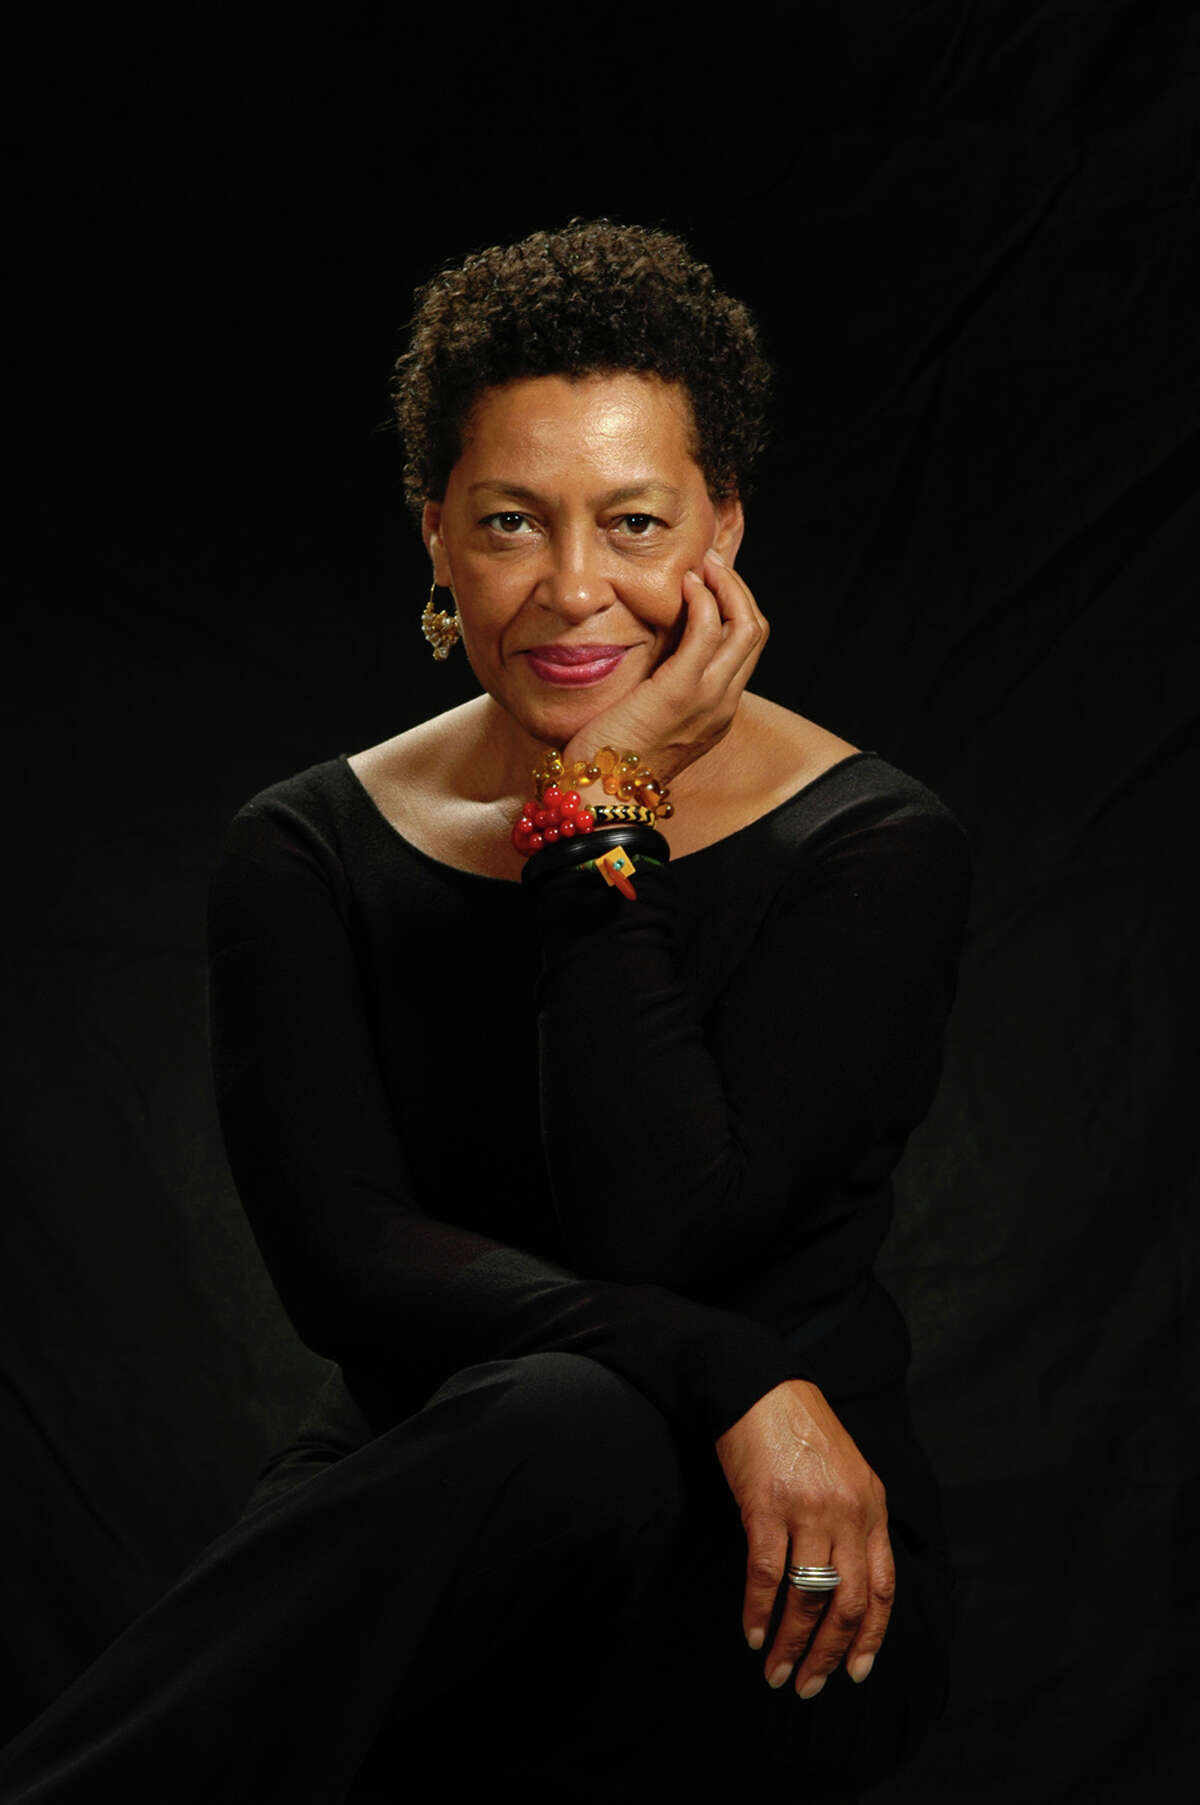 Grace Farms Foundation welcomes artist Carrie Mae Weems on March 23 for a site-responsive showing of Past Tense, a performance-based work exploring enduring themes including social justice, power structures, and cultural identity. Weems is shown at a previous performance called Grace Notes.